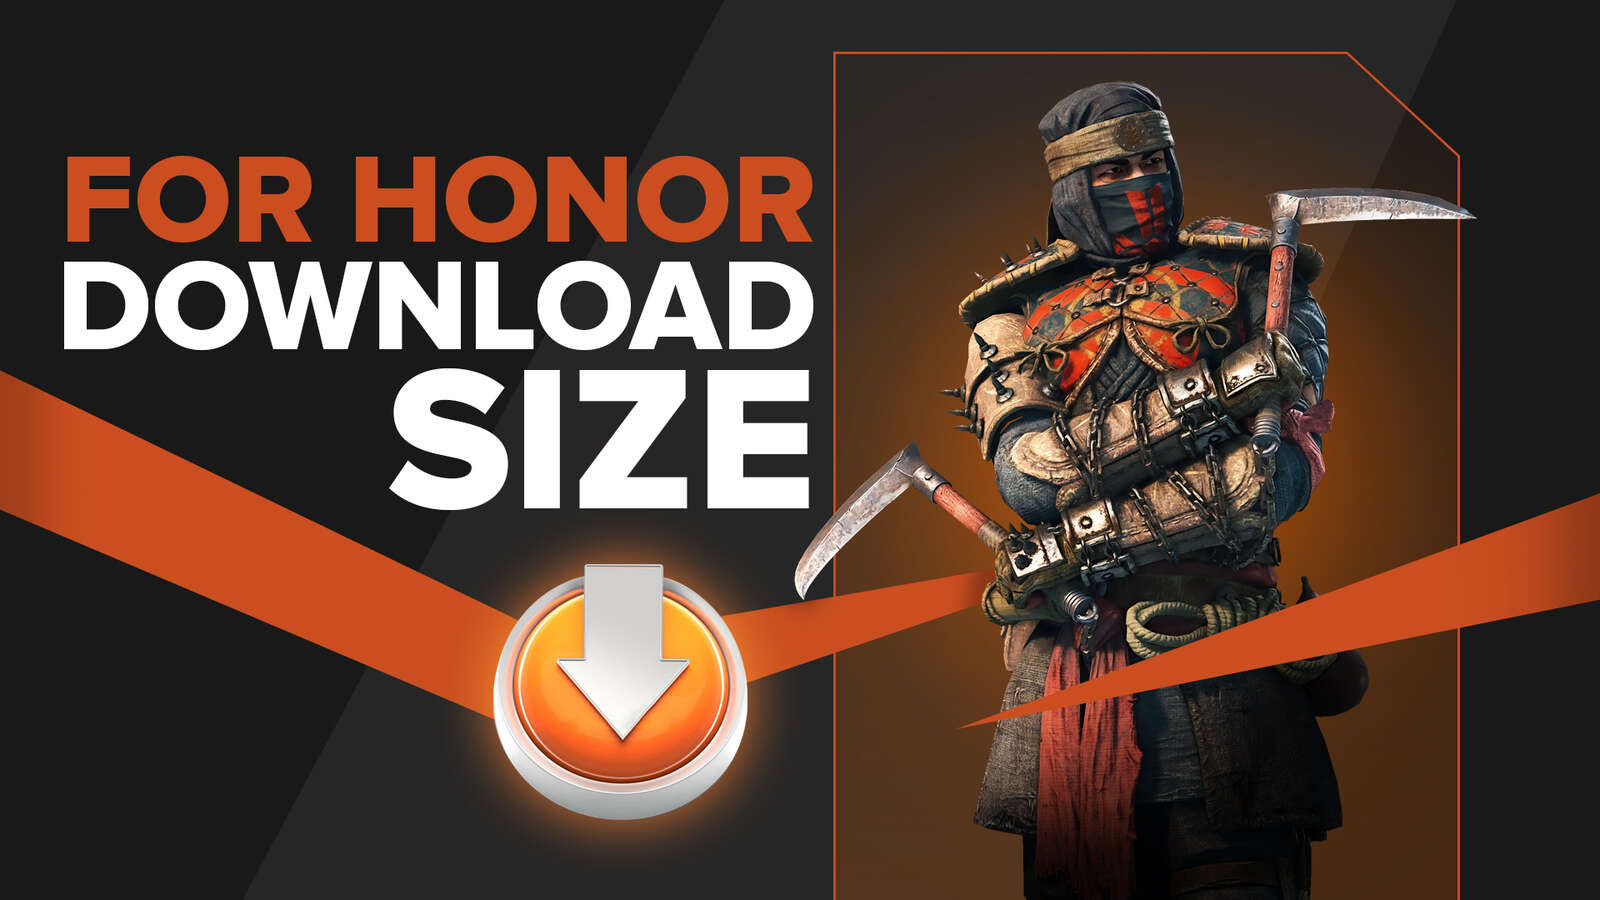 For Honor File Size For All Platforms [Newest Version]